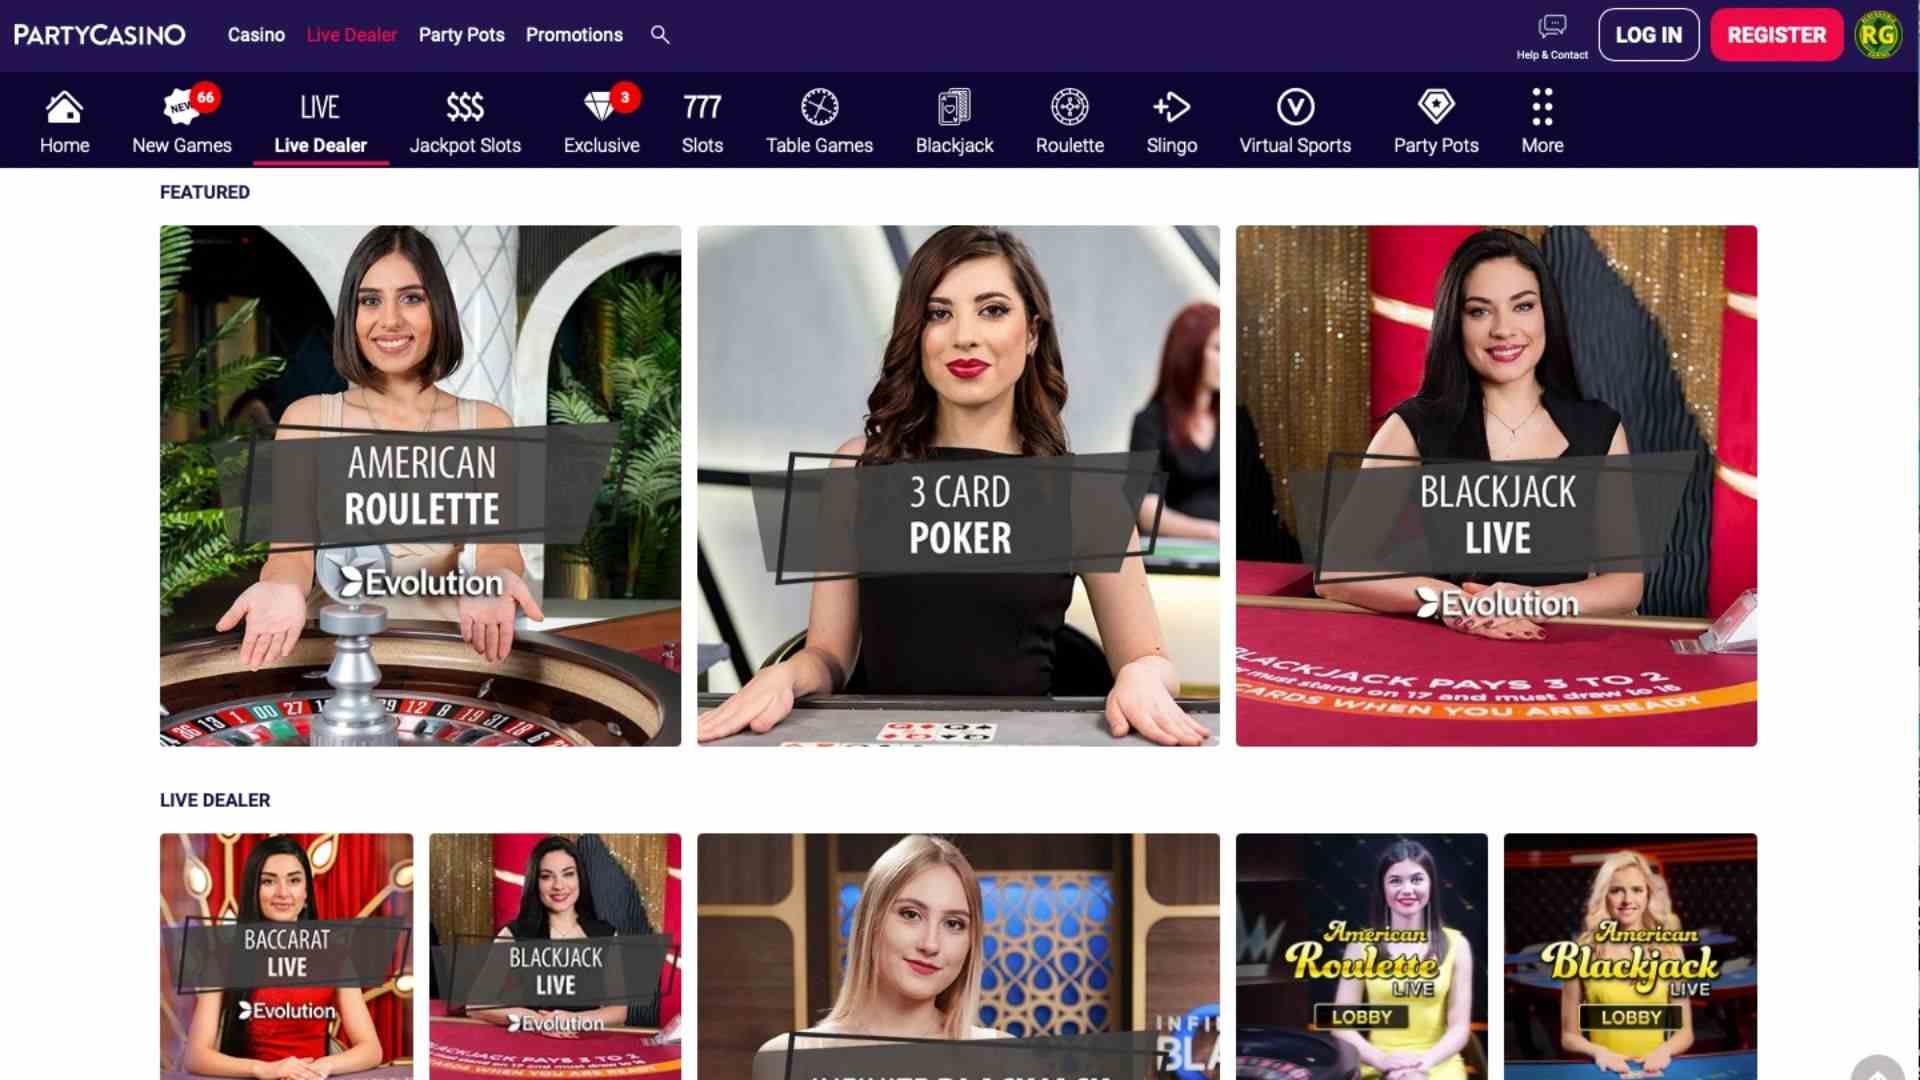 Party Casino Live Games